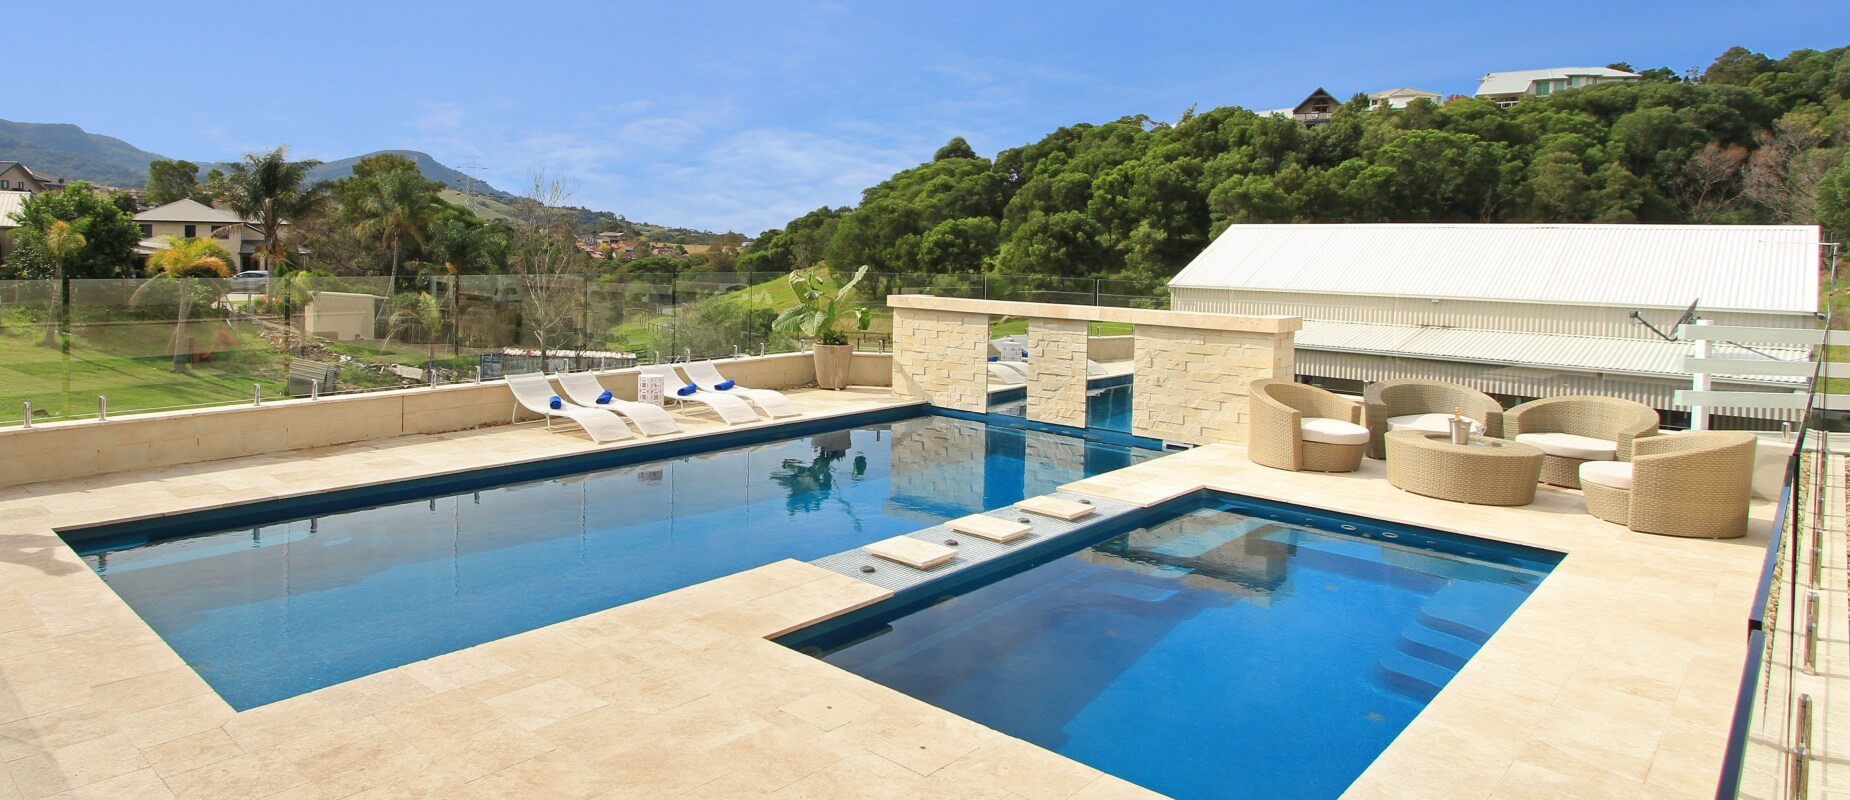 Compass-Pools-Australia_Small-or-large-two-fibreglass-pools-with-spa-jets-and-swim-jets-and-fabulous-views